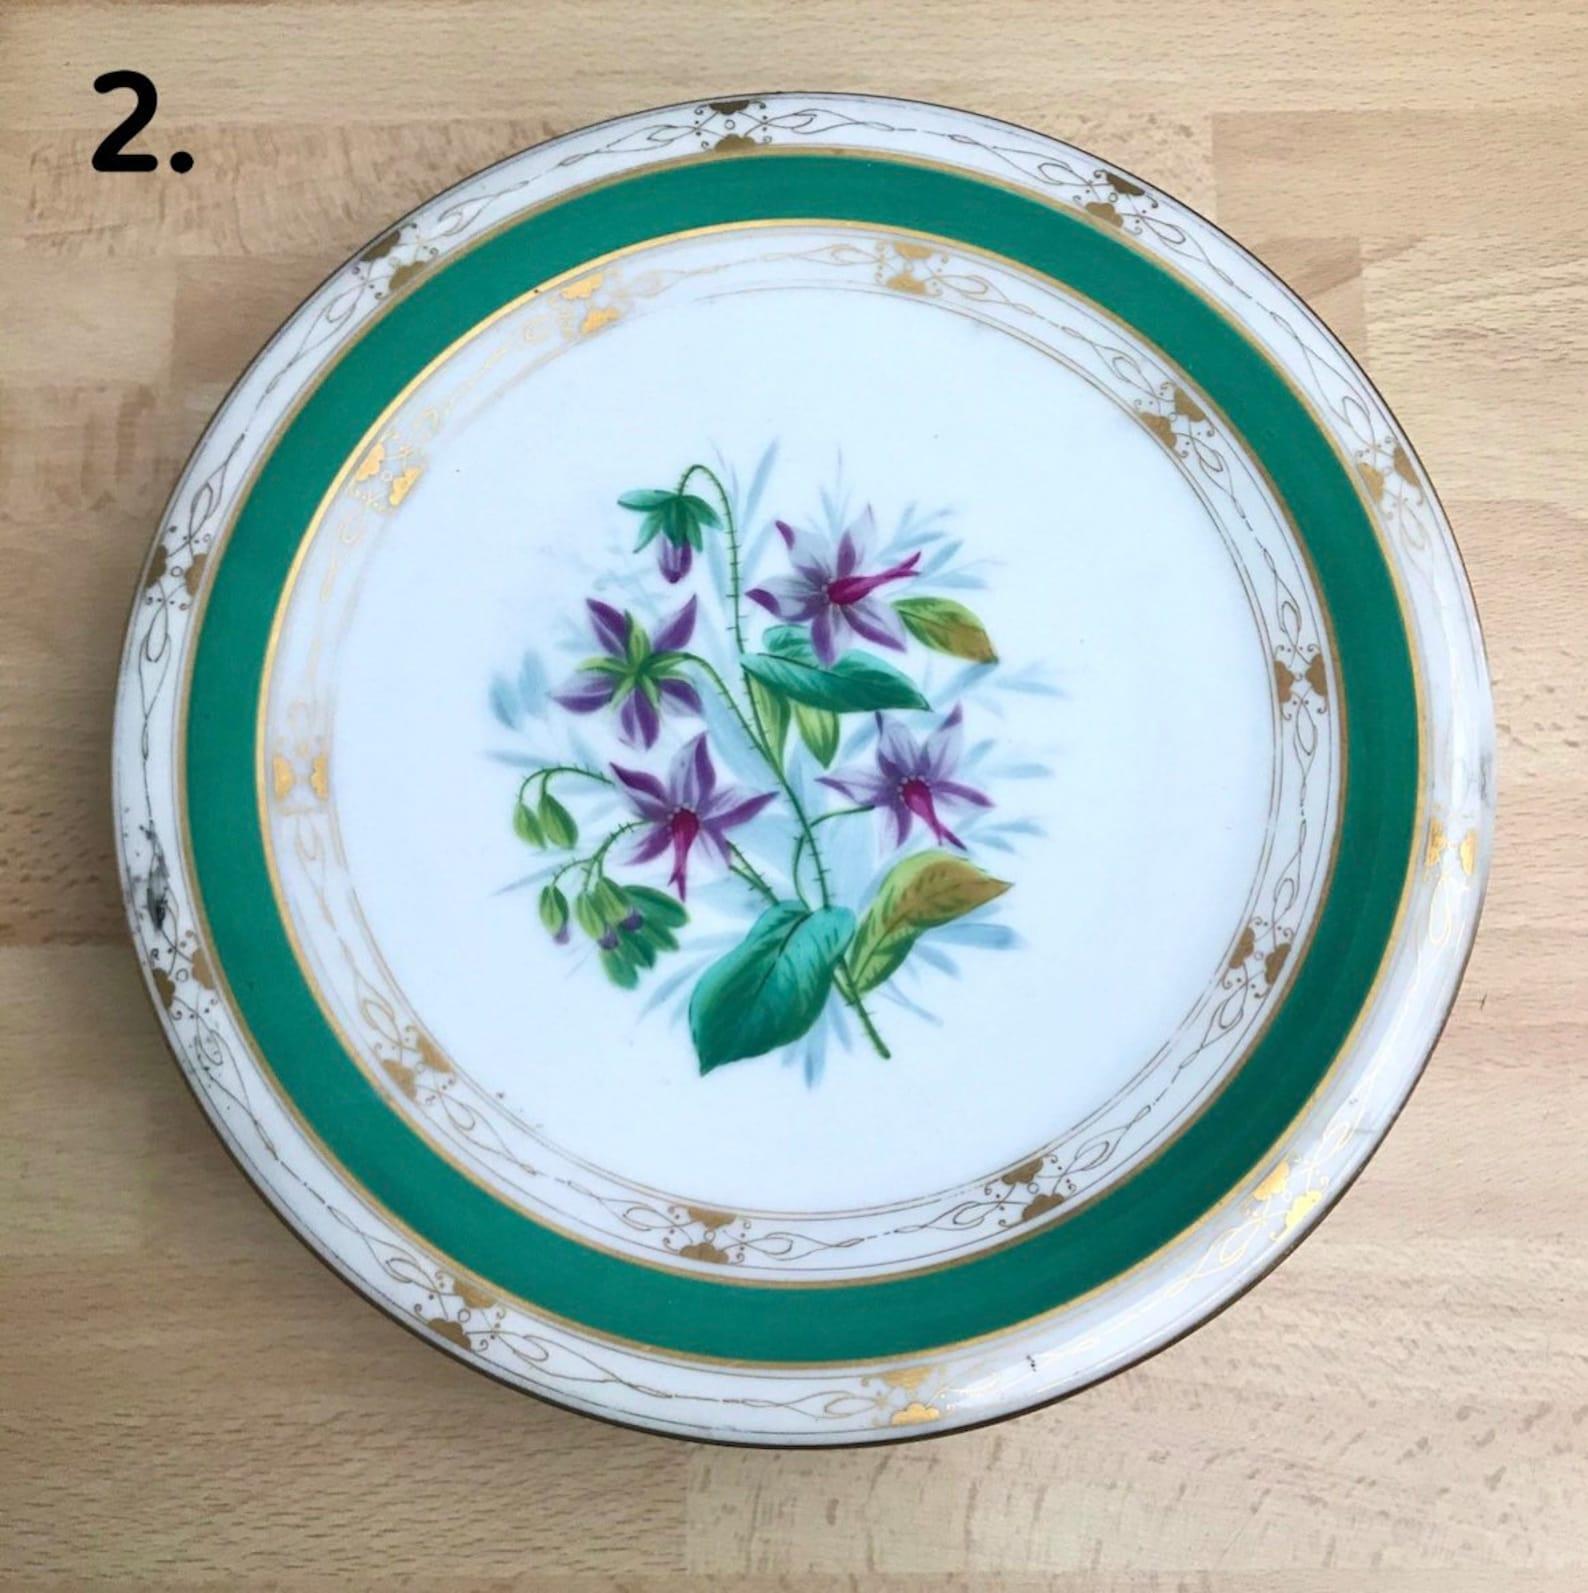 Antique Collectible plates.

Very Beautiful bright plates with Floral Pattern.

Produced in 19 century. 

Antique Value.

Limited edition.

Price per set of three plates.

In good Antique Condition. No chips, cracks or crazings.

Size